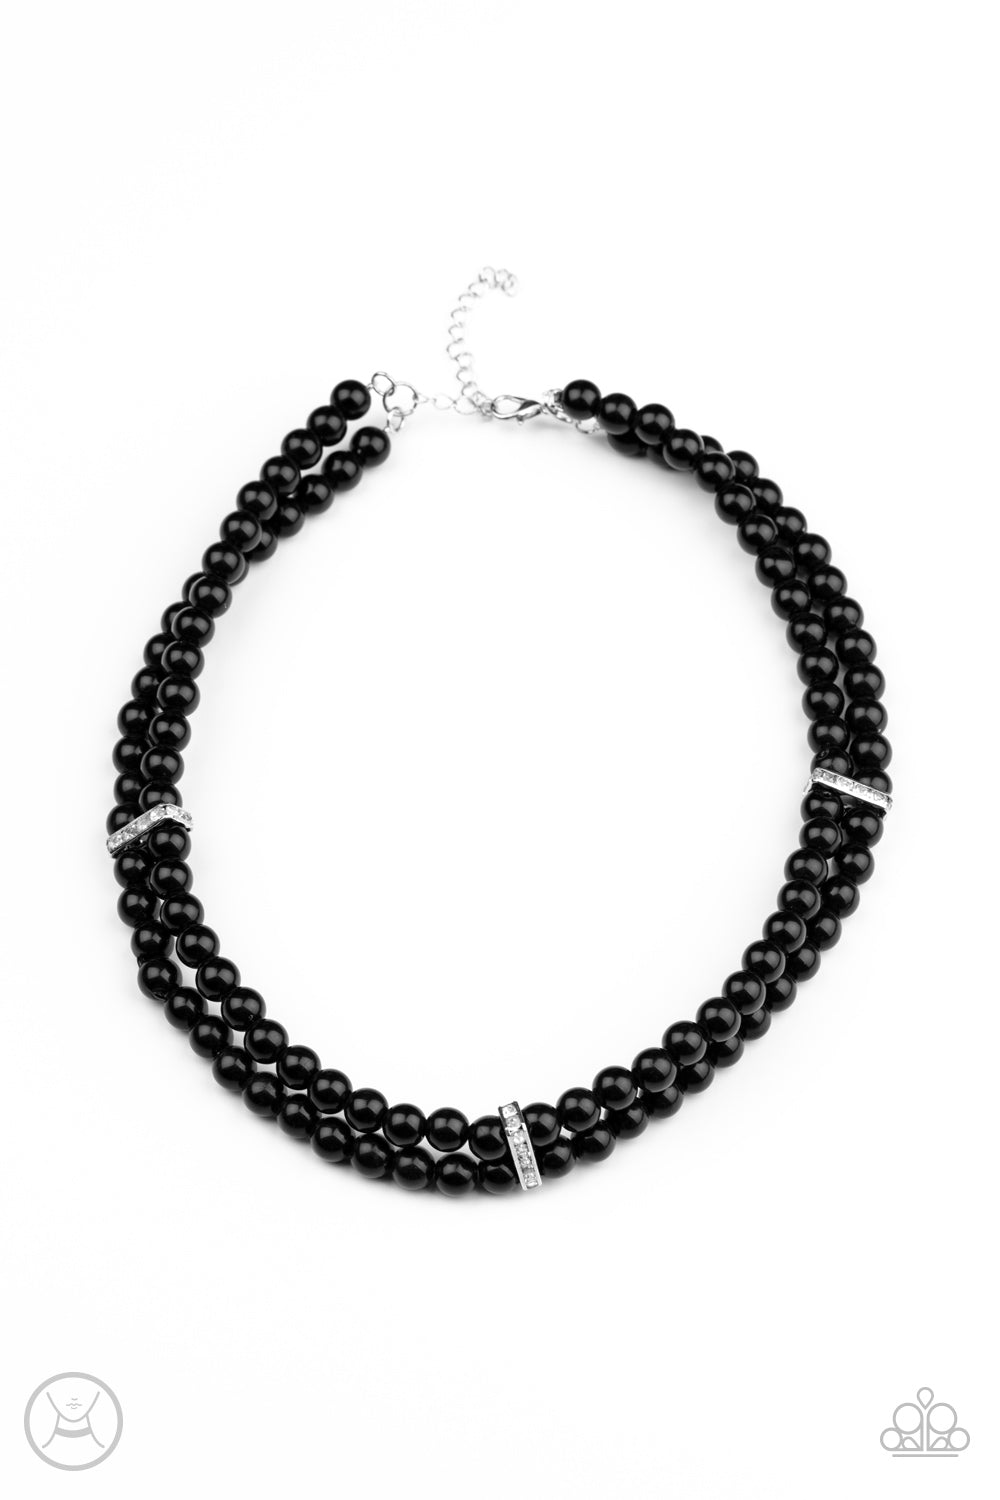 Put On Your Party Dress - Black Necklace